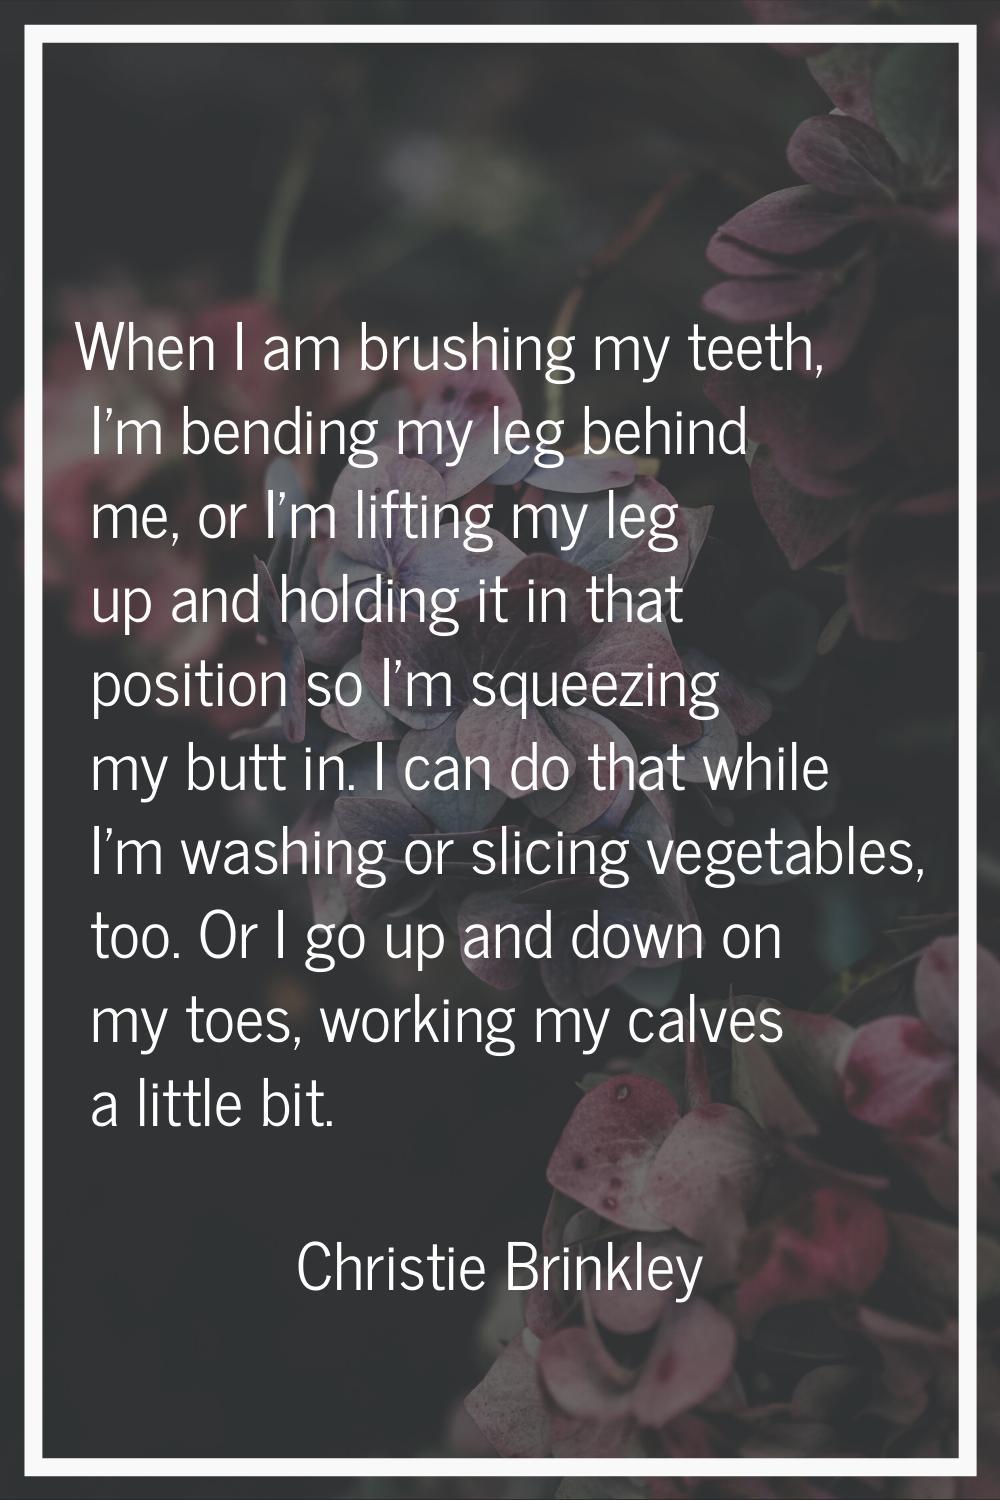 When I am brushing my teeth, I'm bending my leg behind me, or I'm lifting my leg up and holding it 